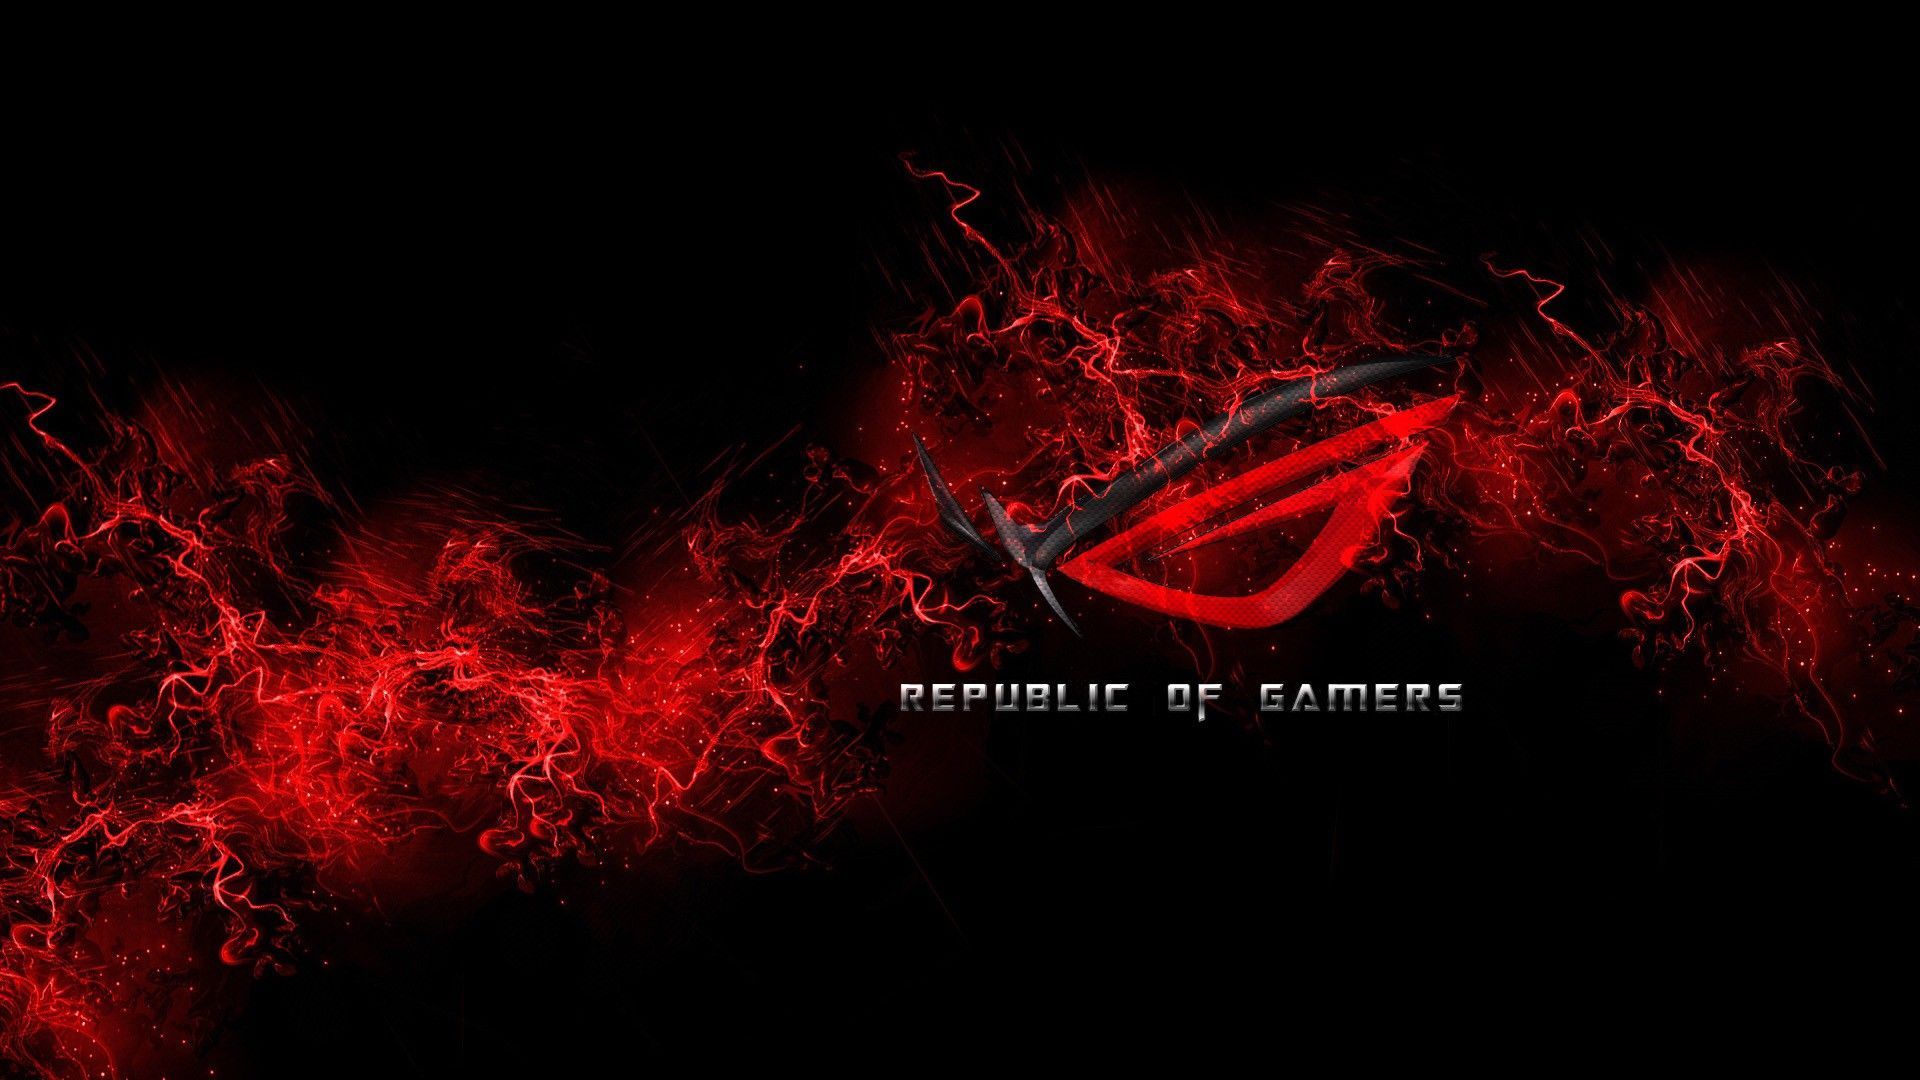 Top Coolest wallpaper for Gaming PC YouTube. Digital wallpaper